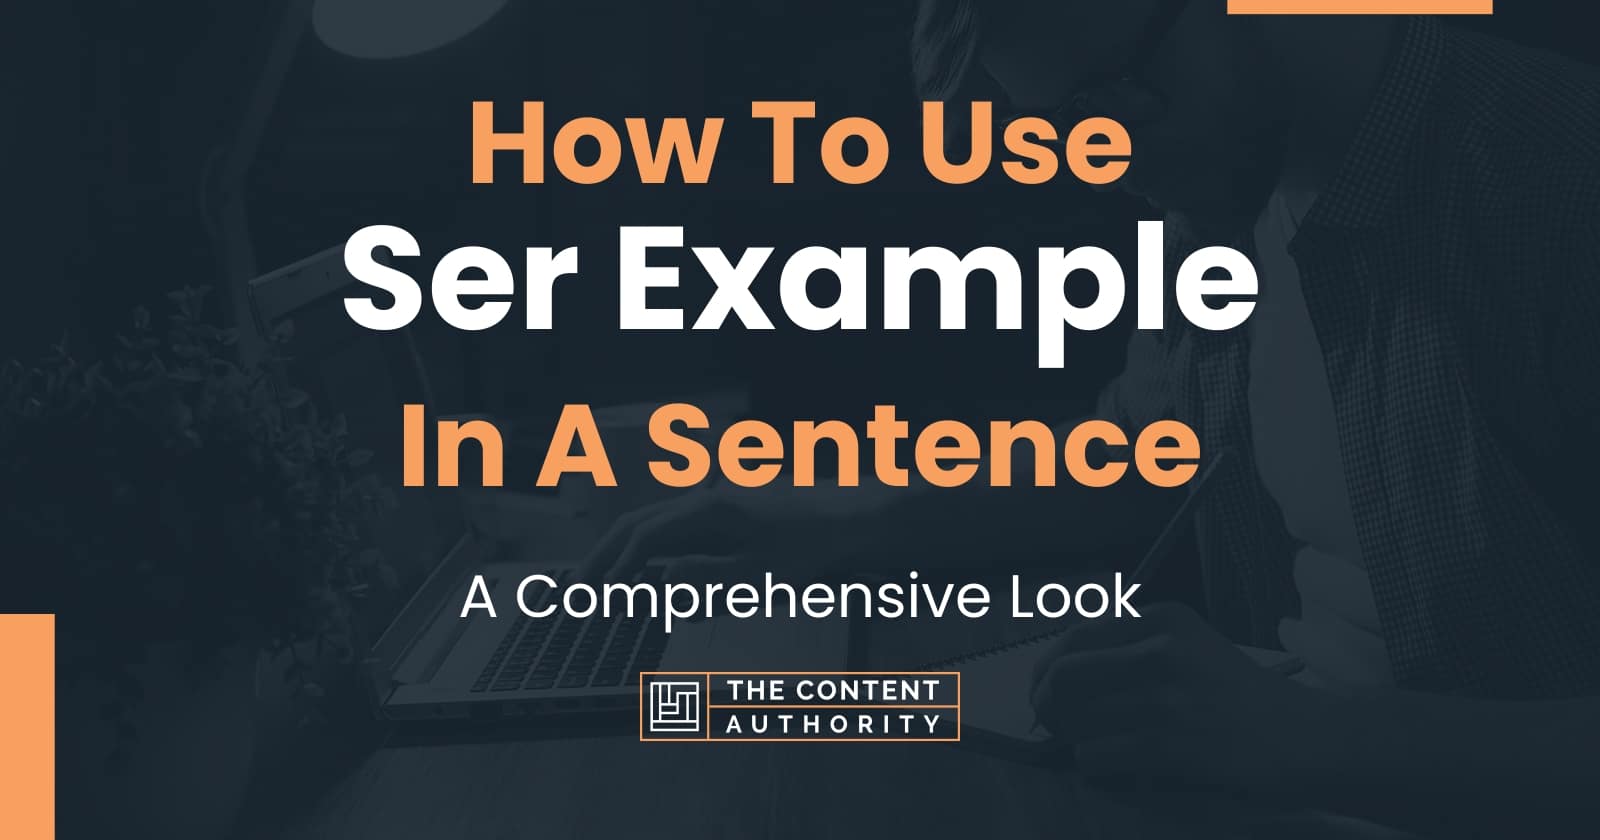 how-to-use-ser-example-in-a-sentence-a-comprehensive-look